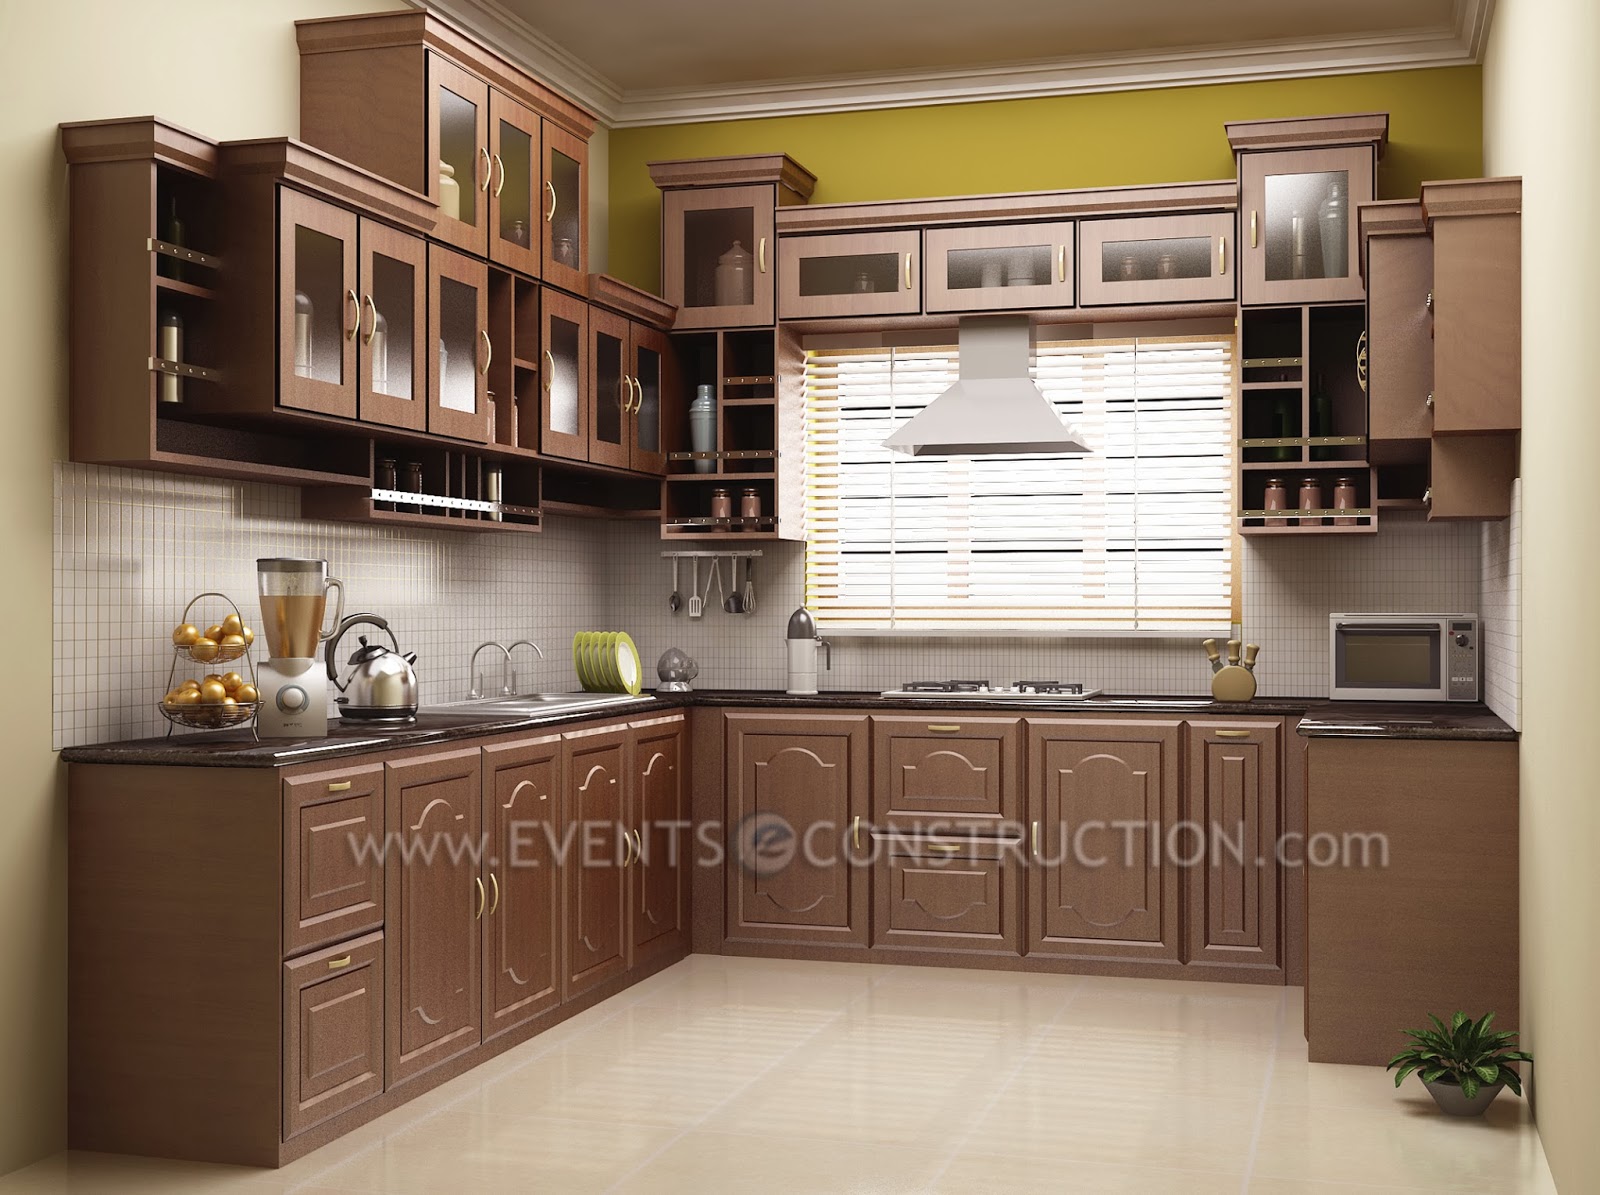 How To Clean Cabinets In The Kitchen Clean Wood Kitchen Cabinets